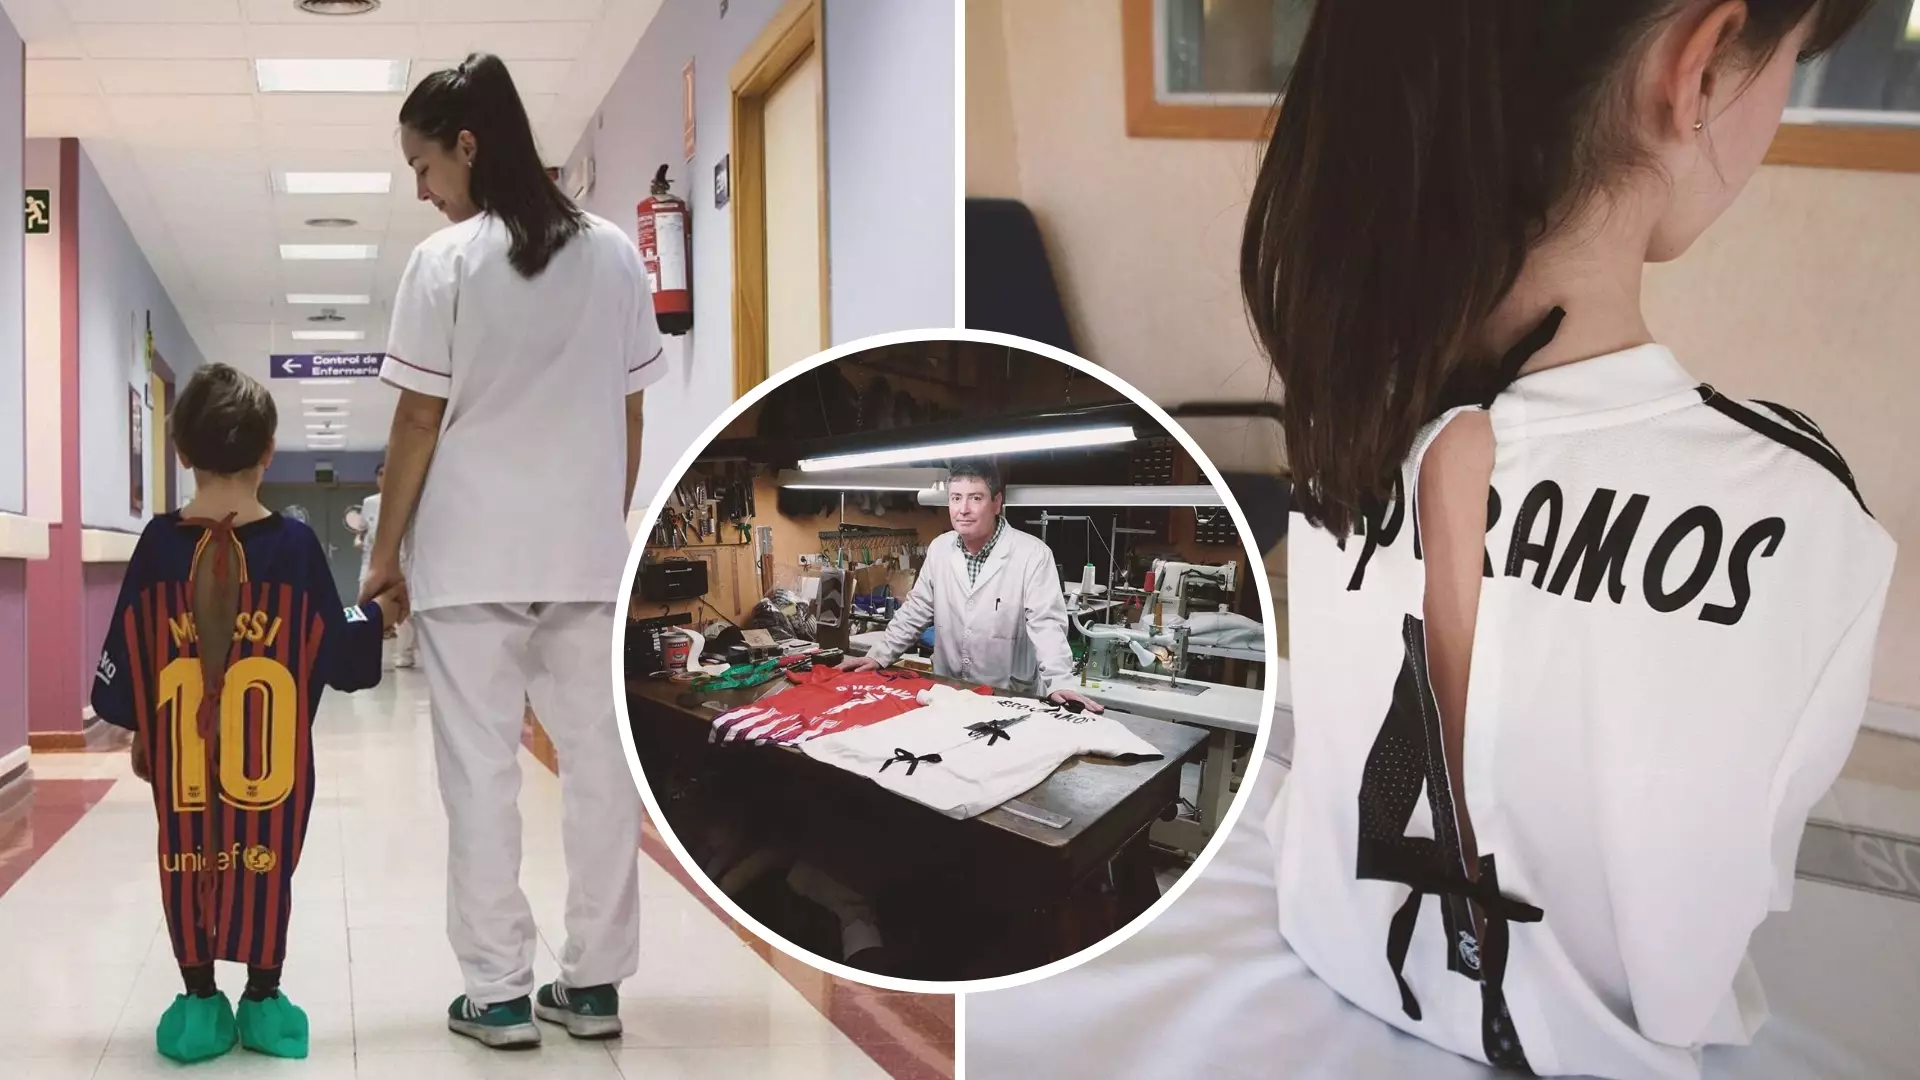 Creative Agency Is Turning Football Shirts Into Hospital Gowns For Ill Children